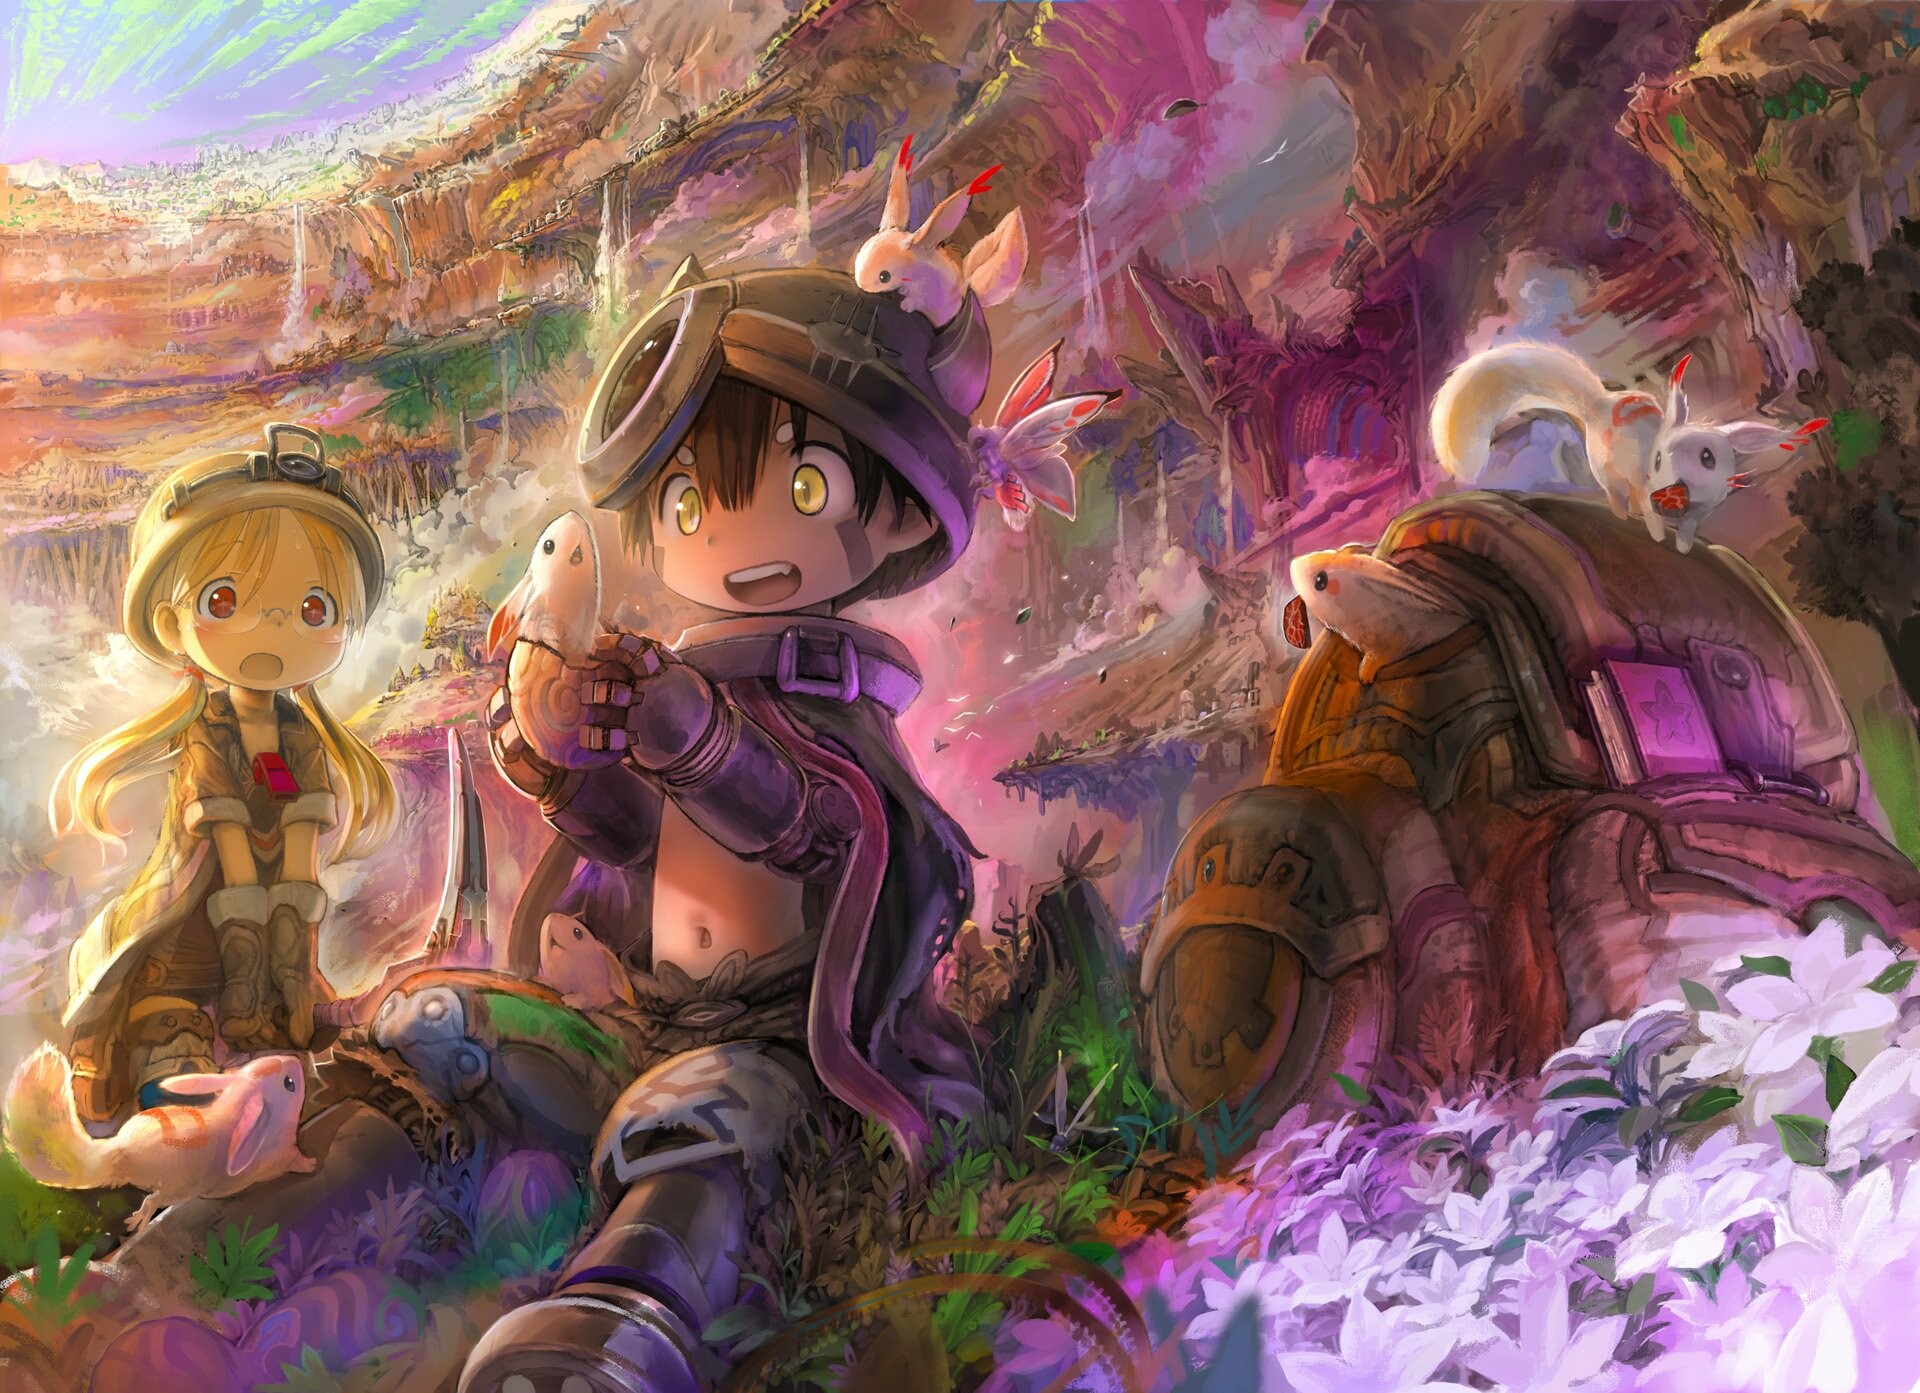 Made in Abyss (TV Series): The first season premiered on Adult Swim's Toonami programming block on January 16, 2022. 1920x1400 HD Wallpaper.